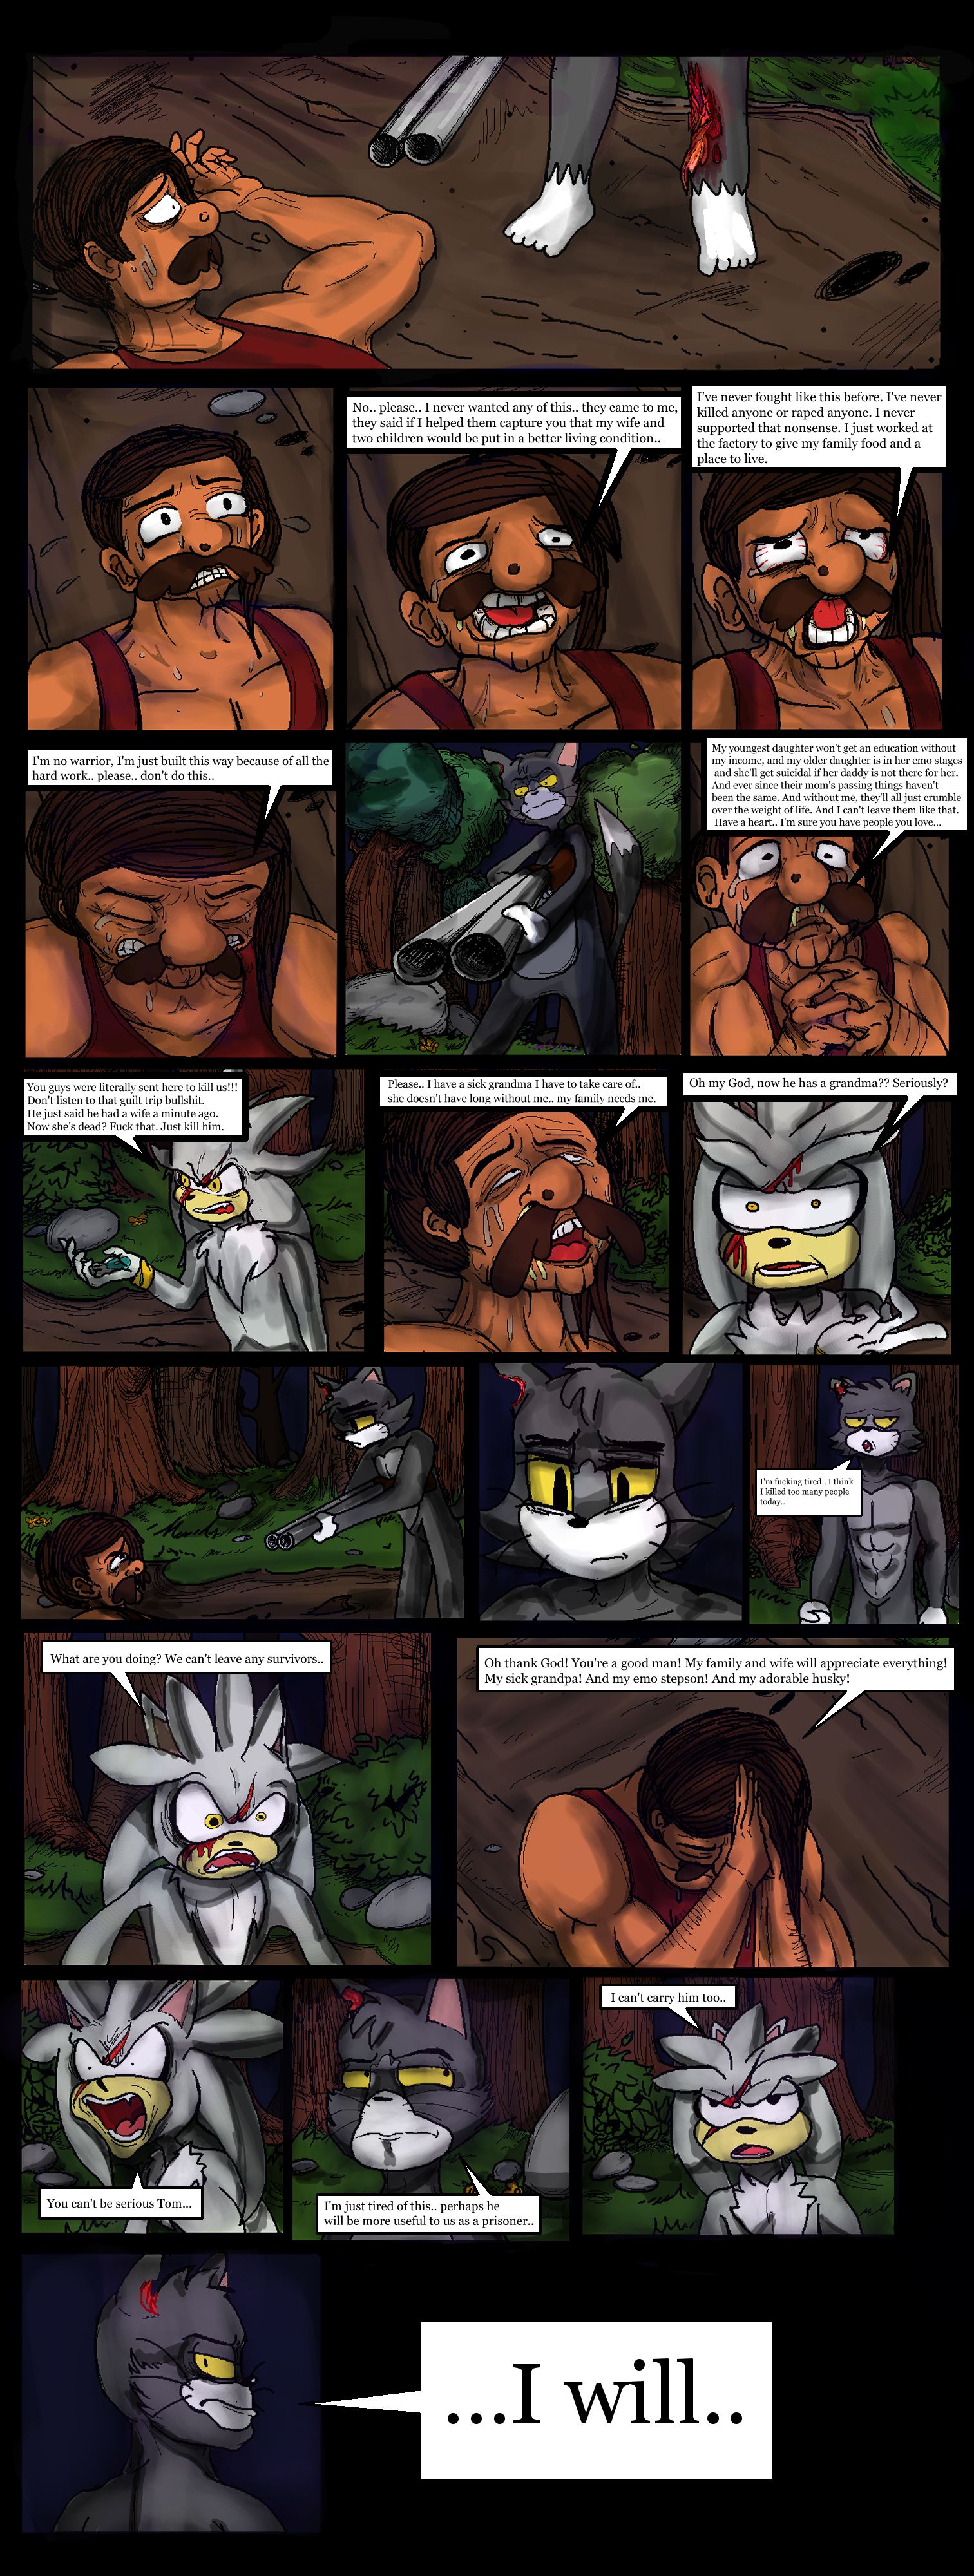 ch25.5/pg24.png. If you're seeing this, enable images. Or, perhaps we have a website issue. Try refreshing, if unsuccessful email commodorian@tailsgetstrolled.org with a detailed description of how you got here.